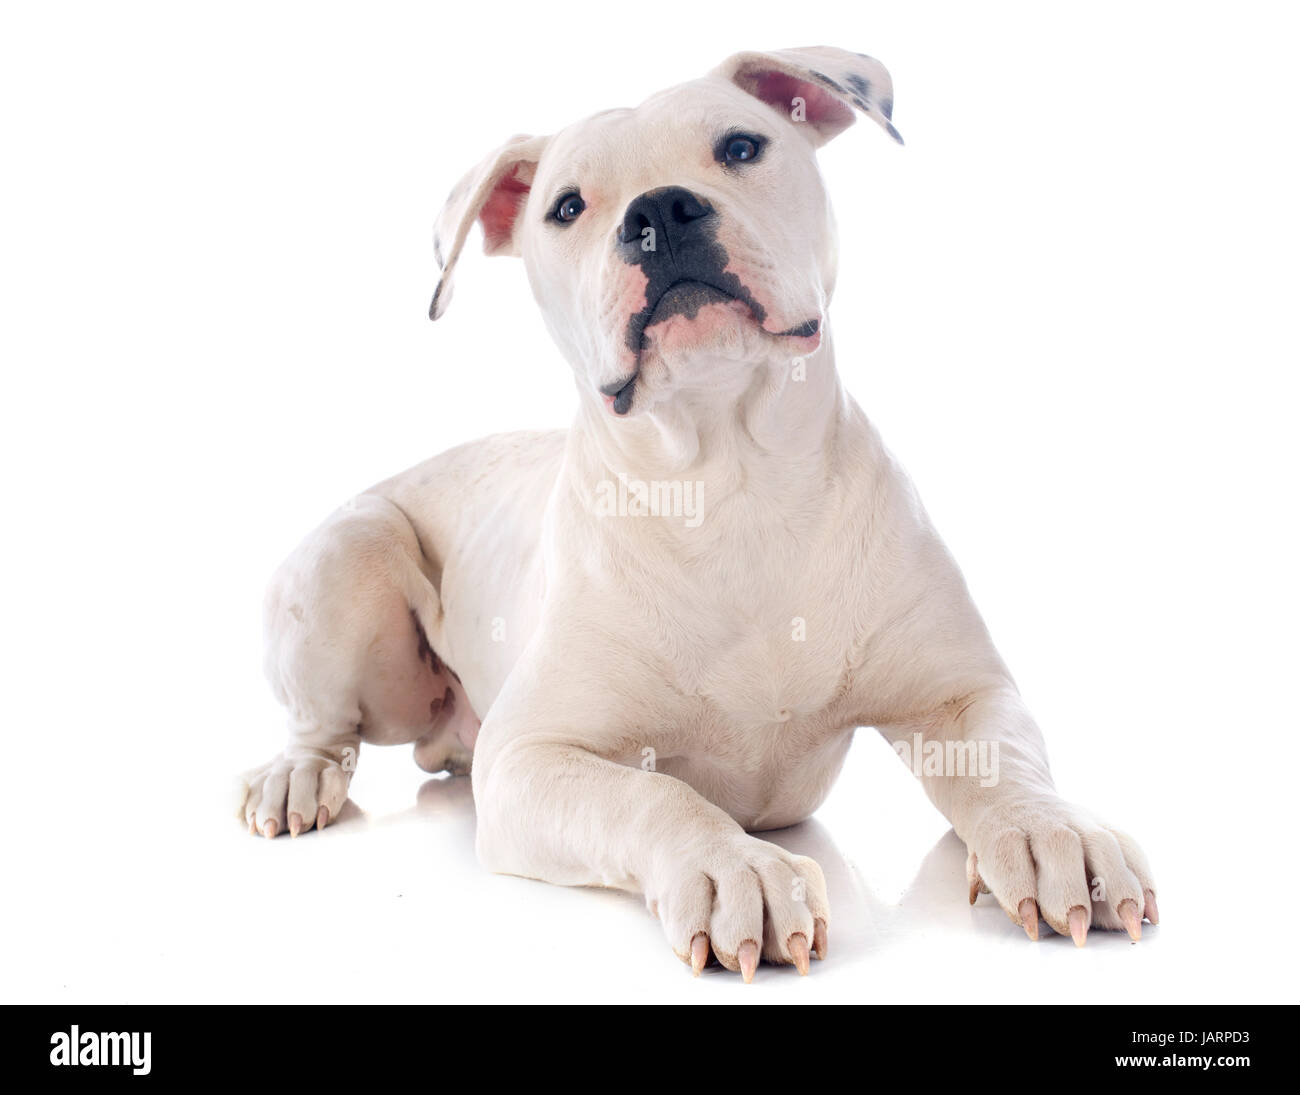 American Bulldog in front of white background Banque D'Images